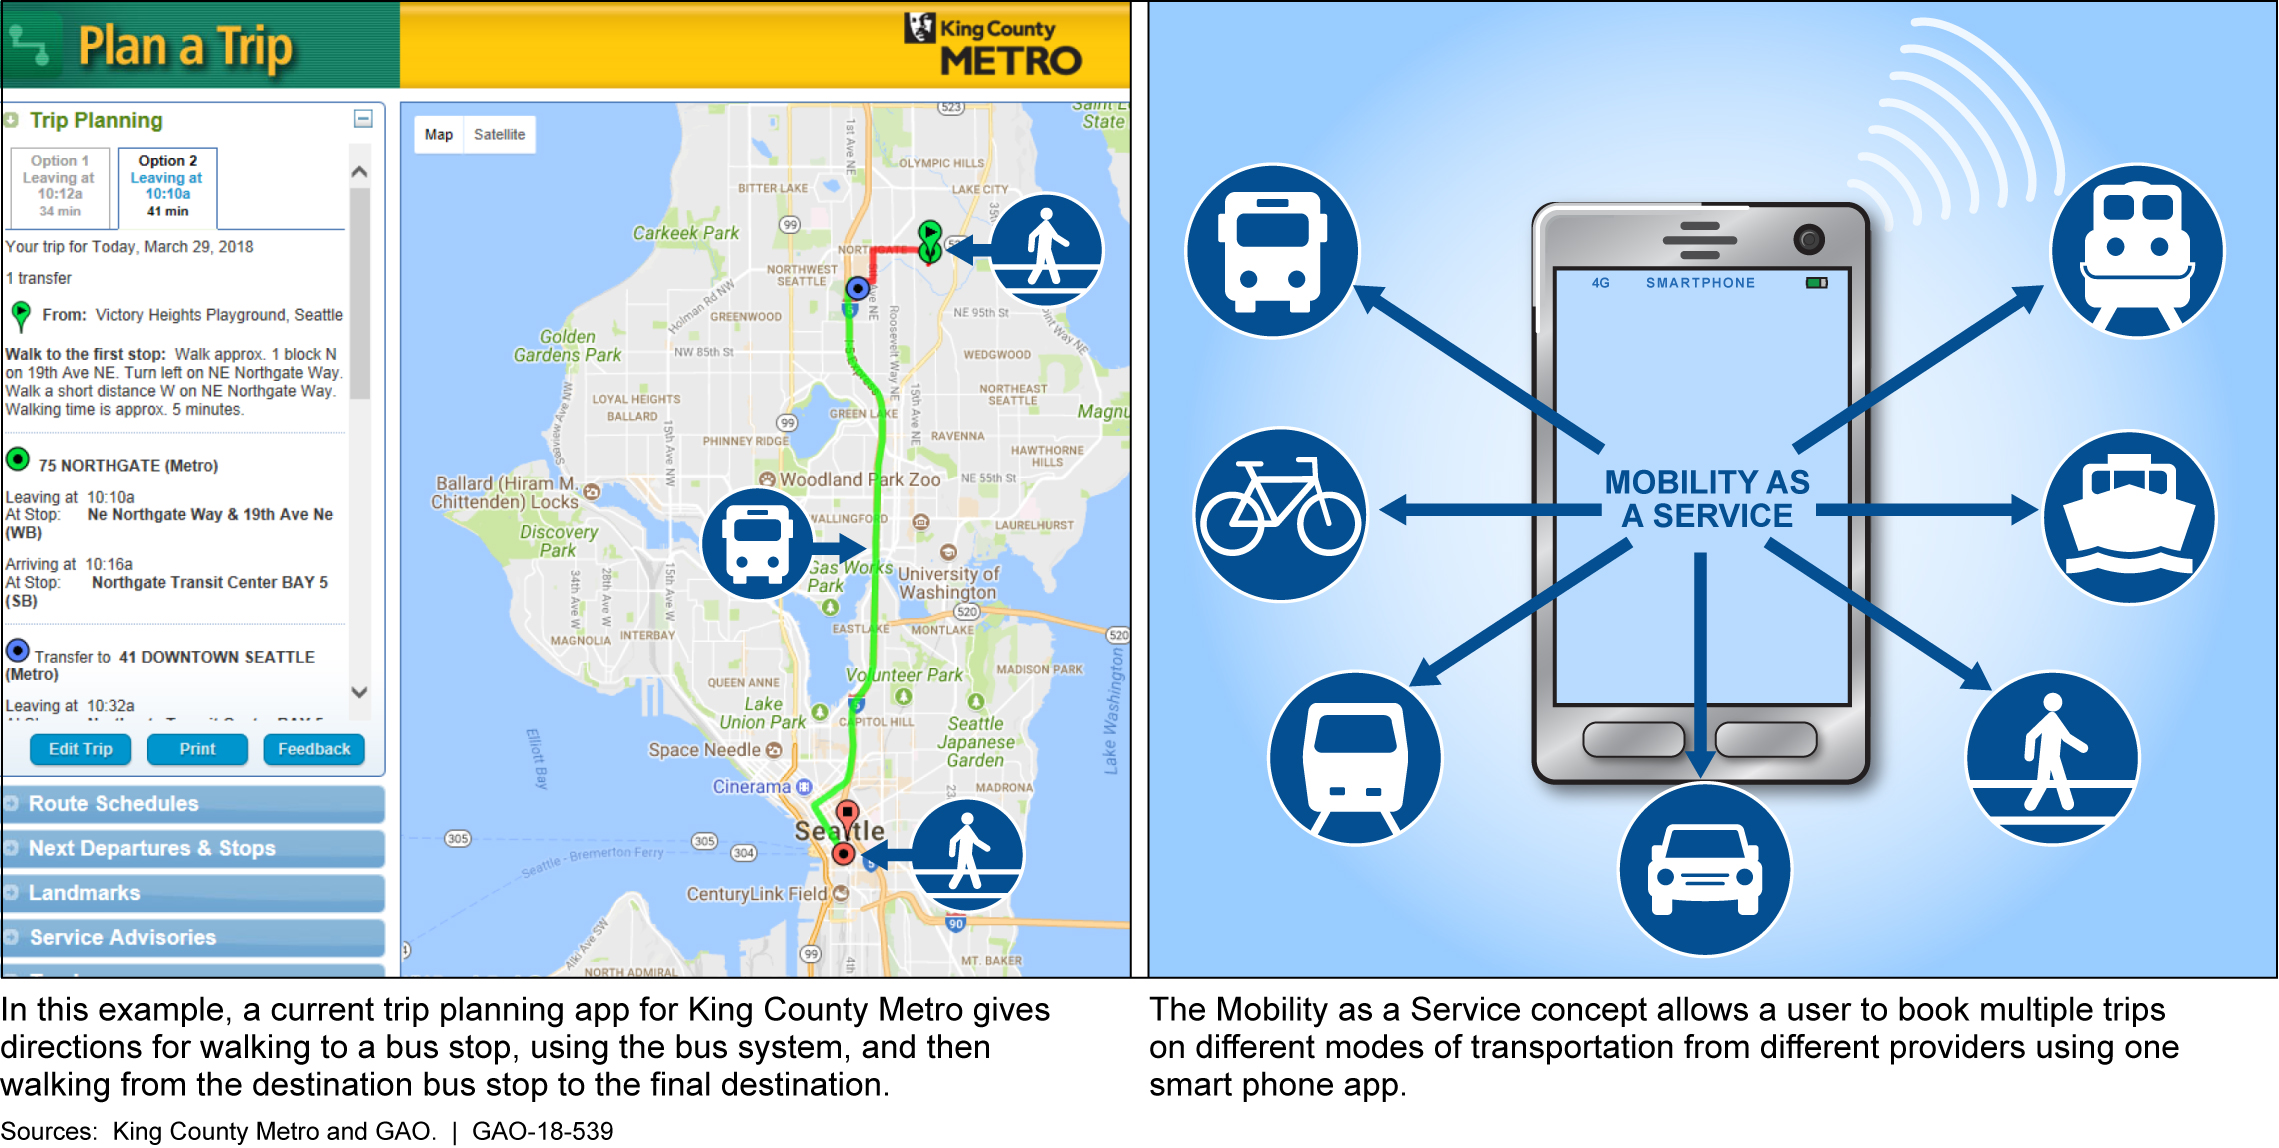 Sample of Current Trip Planner and Future Mobility as a Service Concept